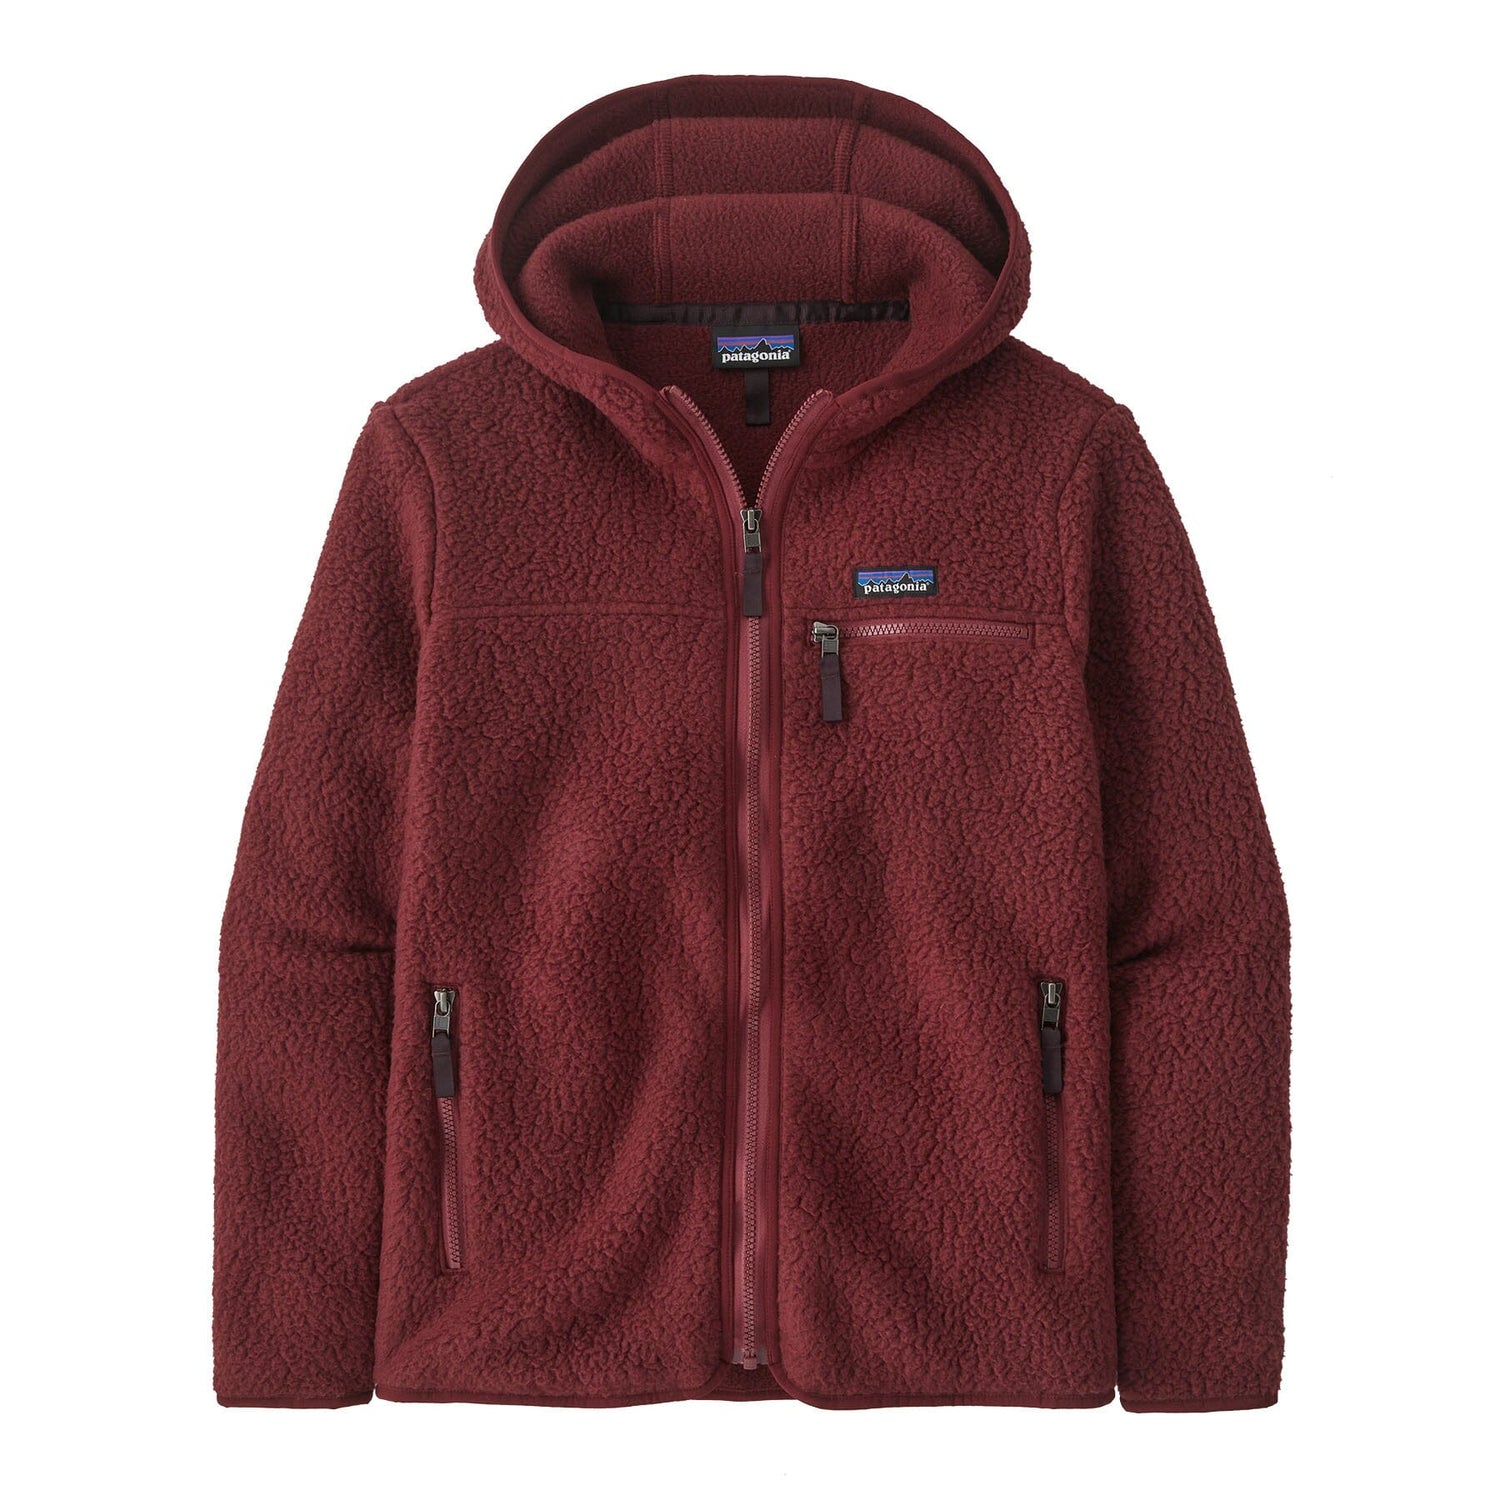 Patagonia W's Retro Pile Fleece Hoody - Recycled Polyester Carmine Red Jacket